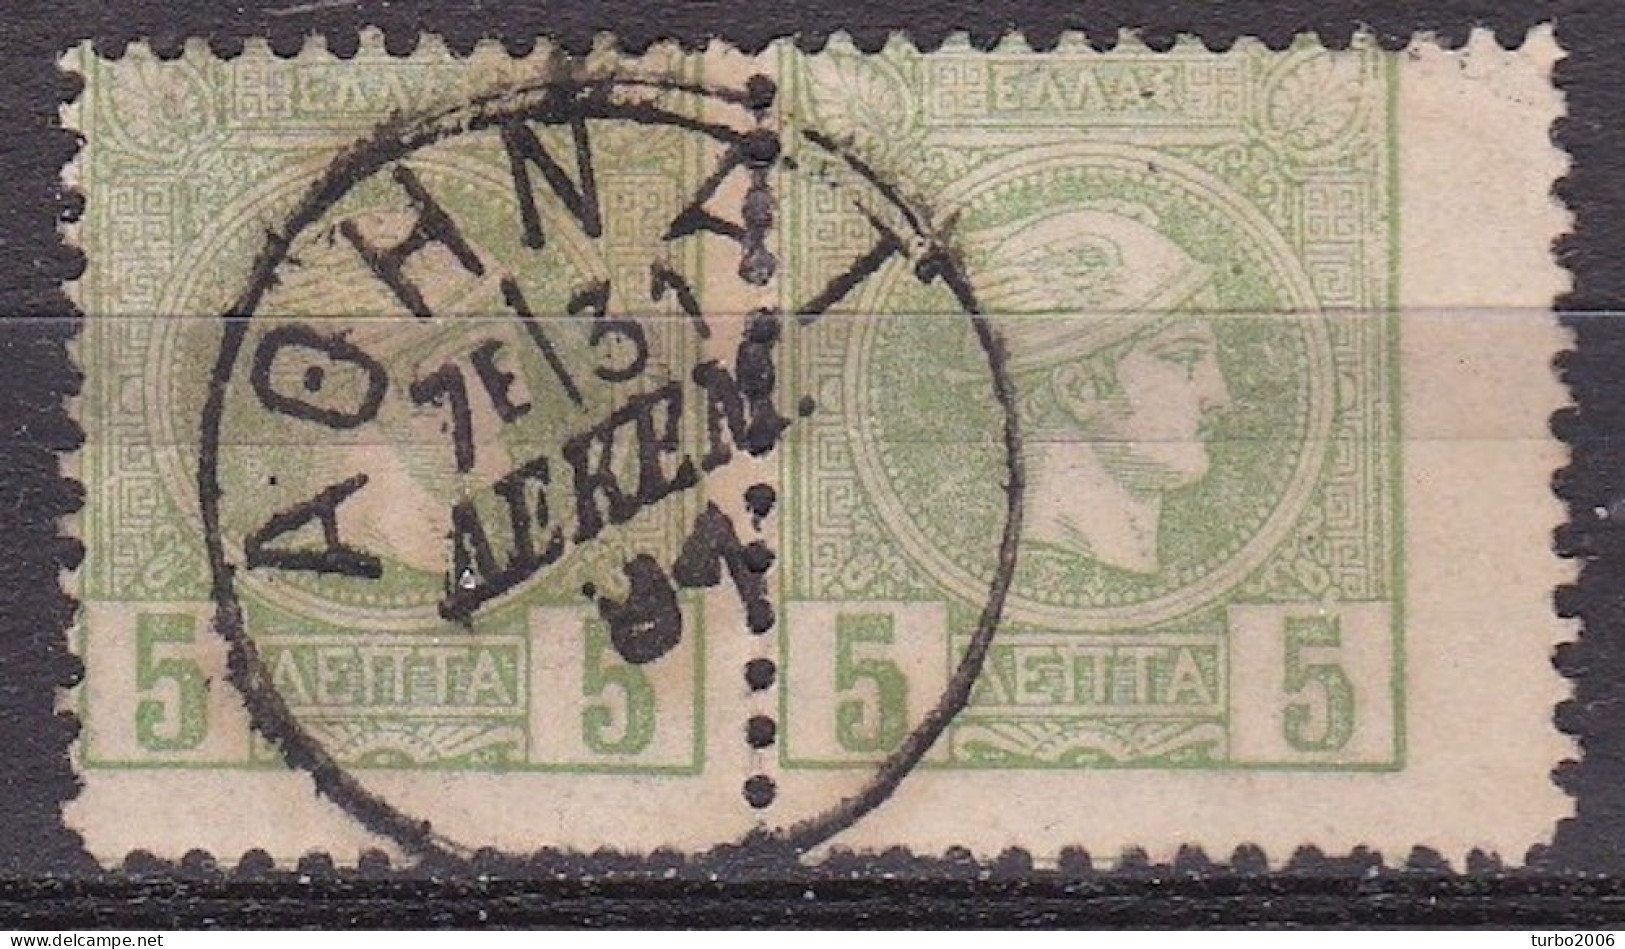 GREECE 1891-96 Small Hermes Head 5 L Pale Green Athens Issue Perforated 11½ Pair Small / Large Margin Vl. 109 A - Usati